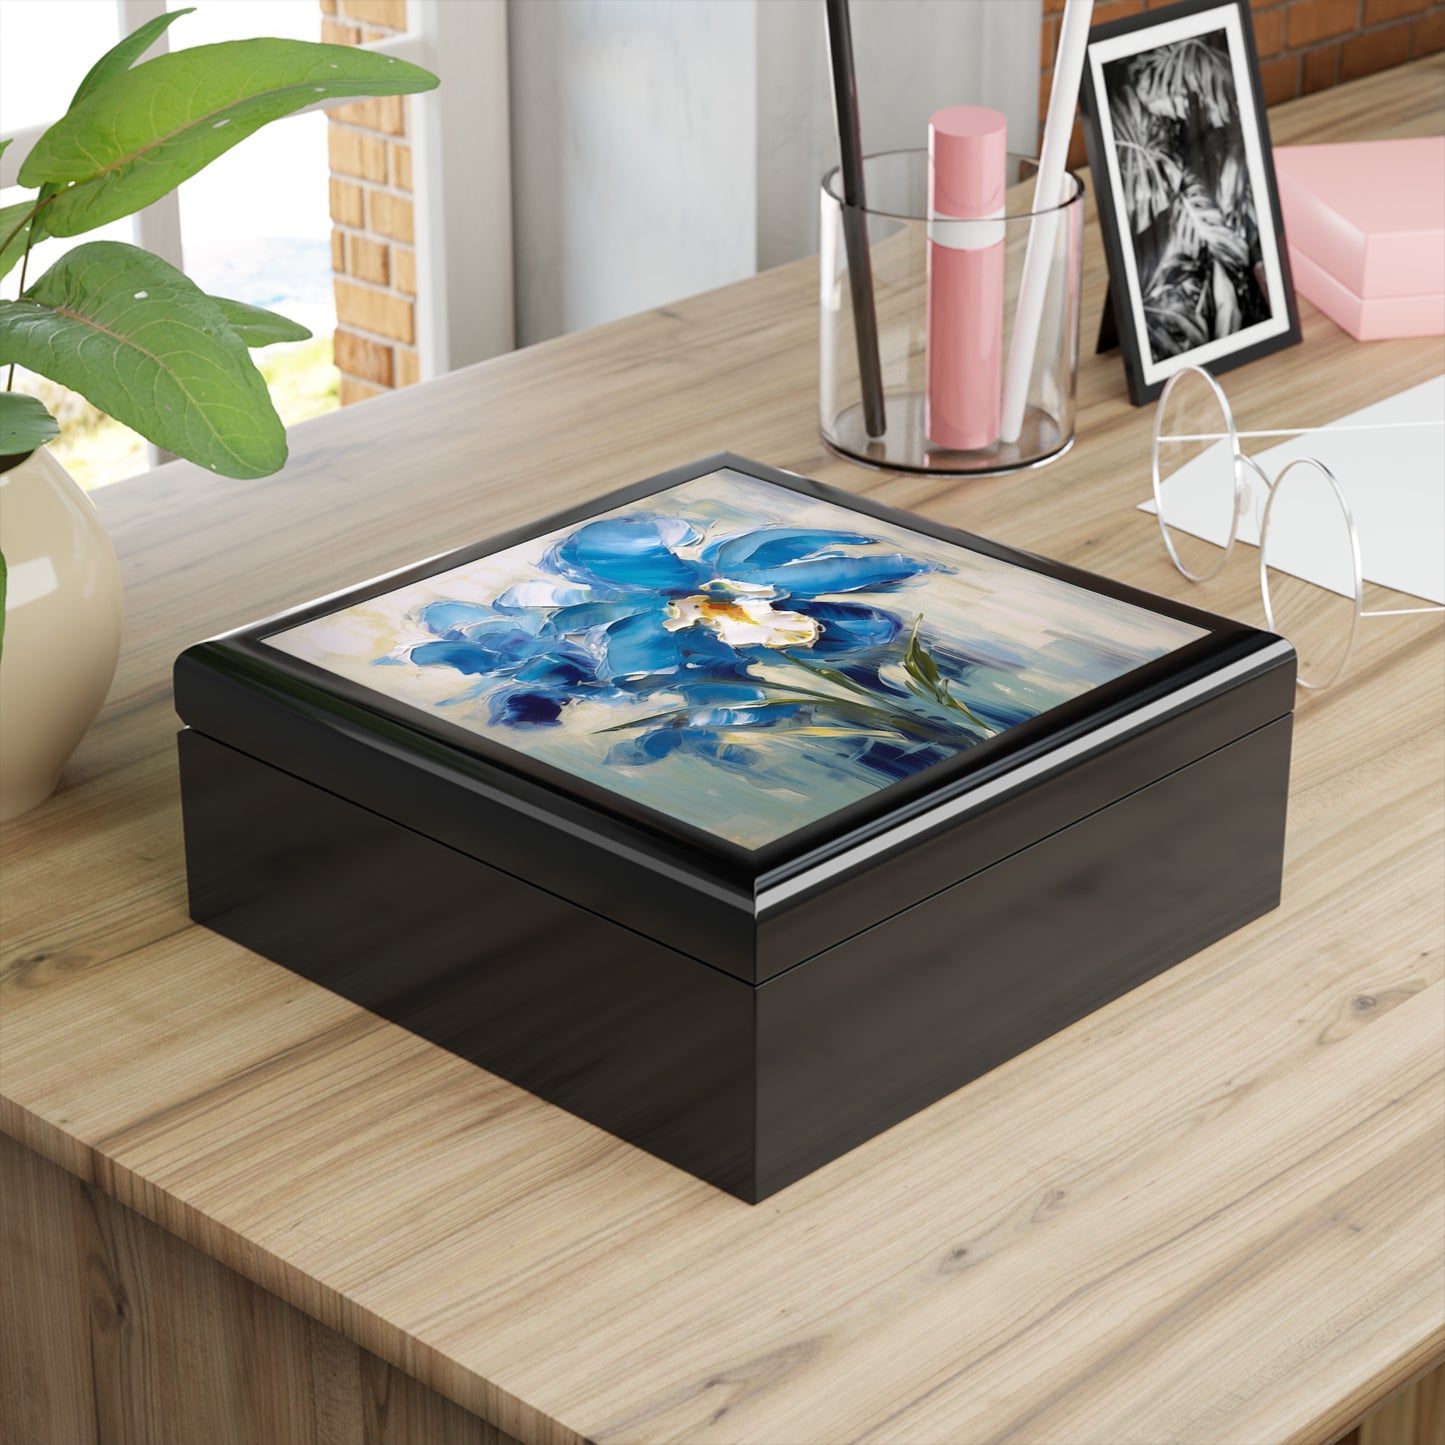 Embrace Artistic Expression with Blue Orchid Abstract Painting Jewelry Box